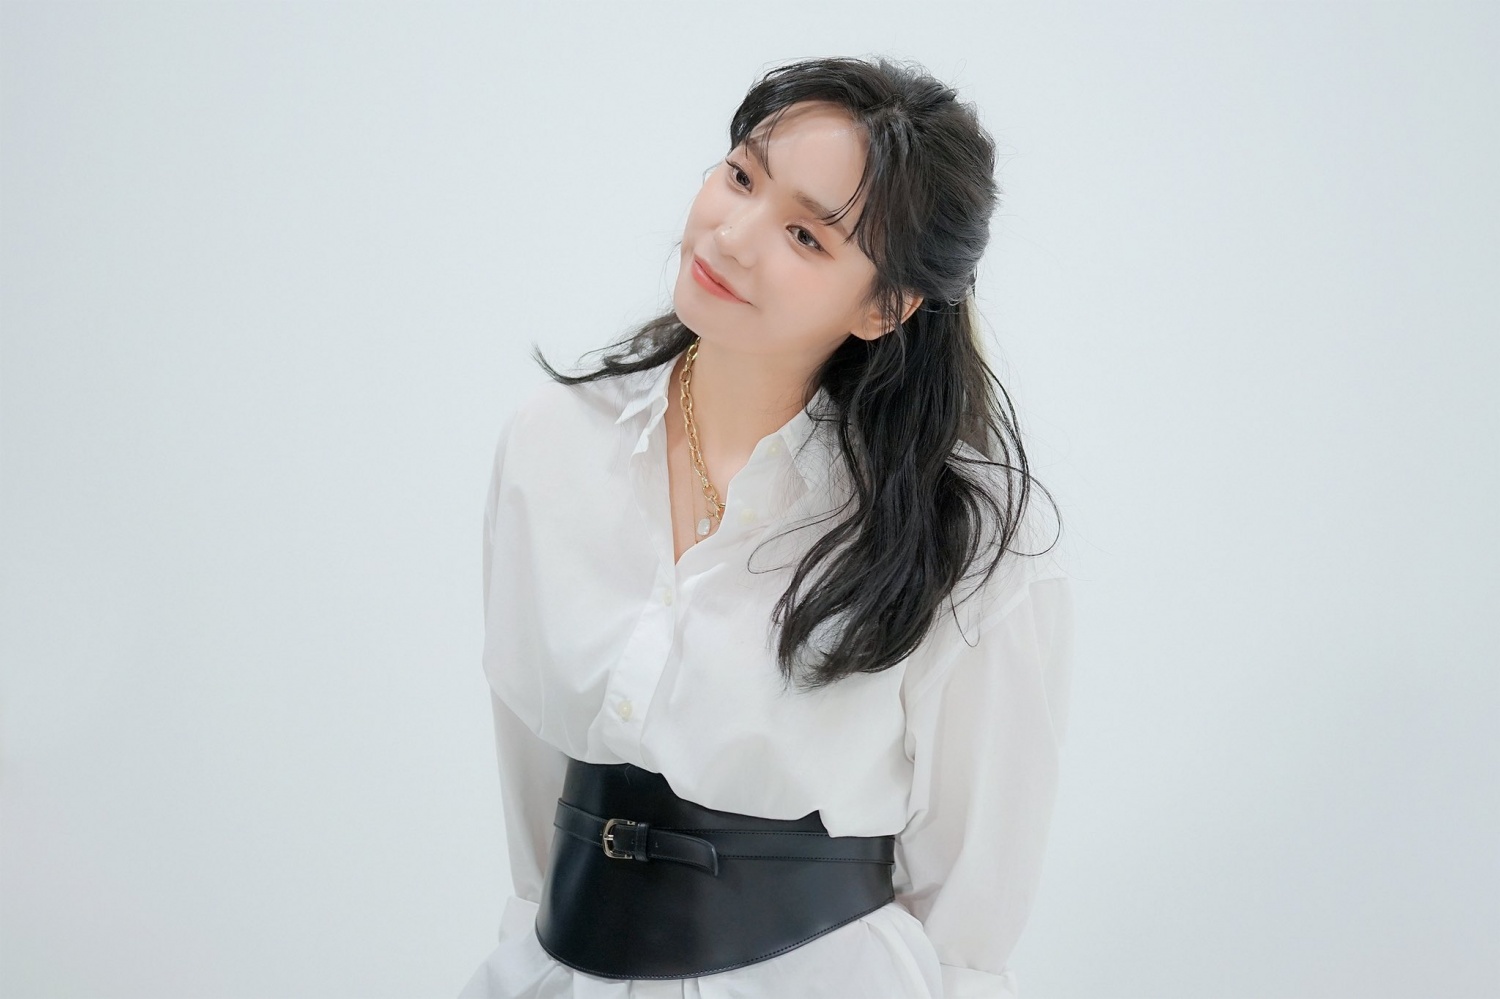 Lee Jin Ah "Thanks for the comeback after a long time… 'Rum Pum Pum' contains a message of hope"